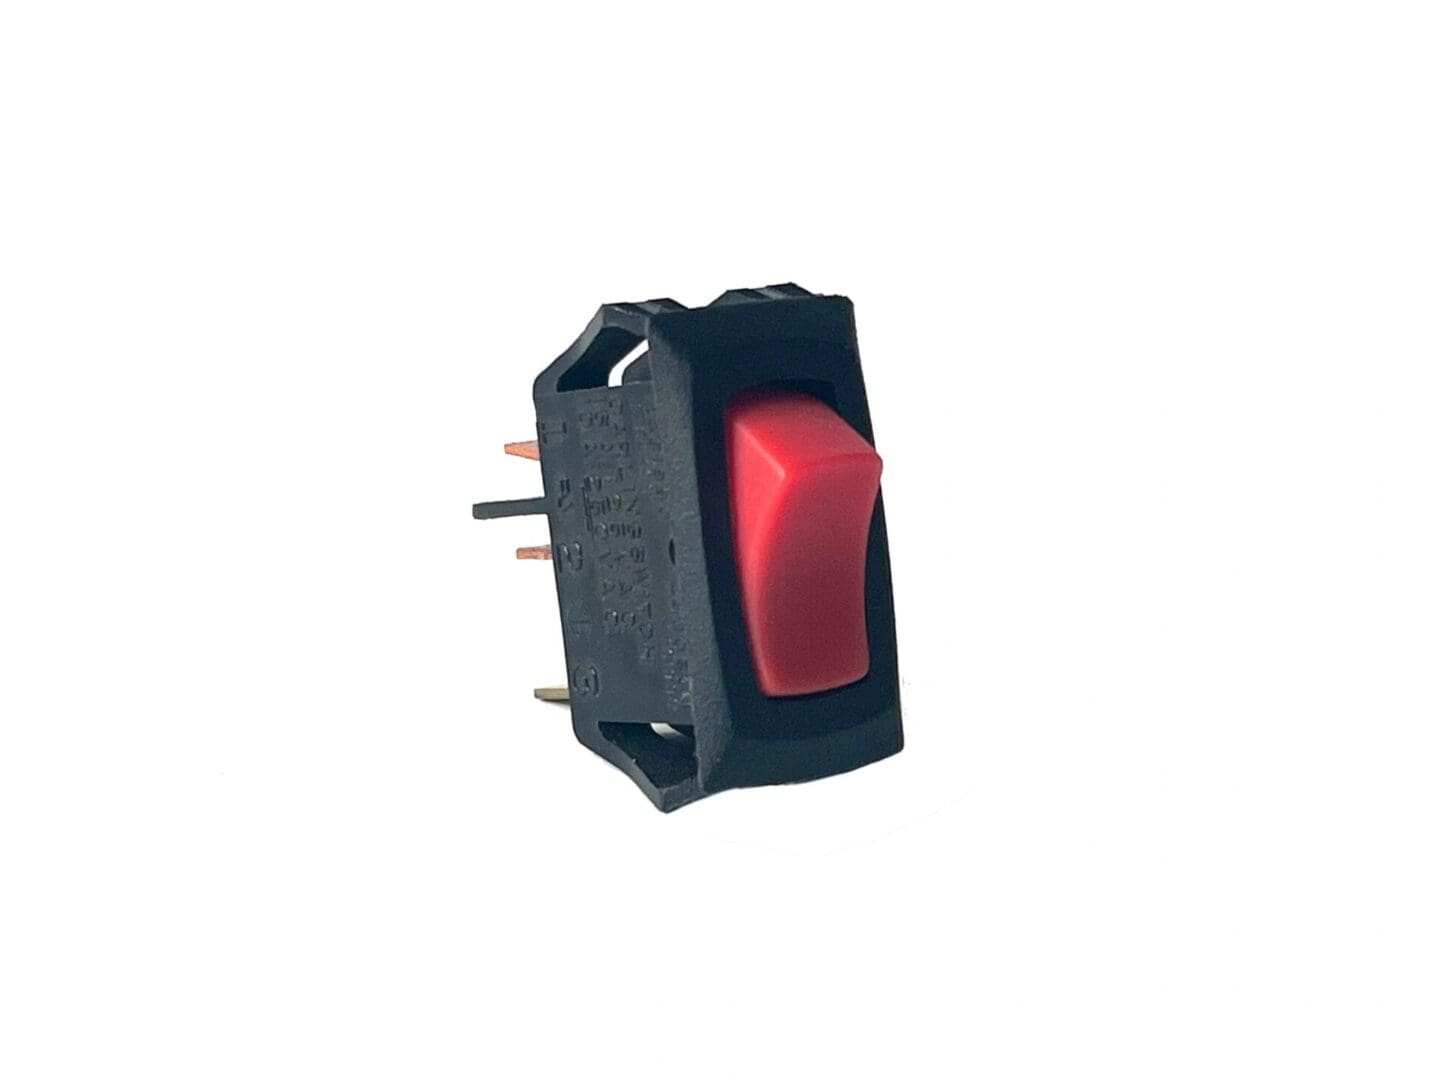 A red light is on the side of a black switch.